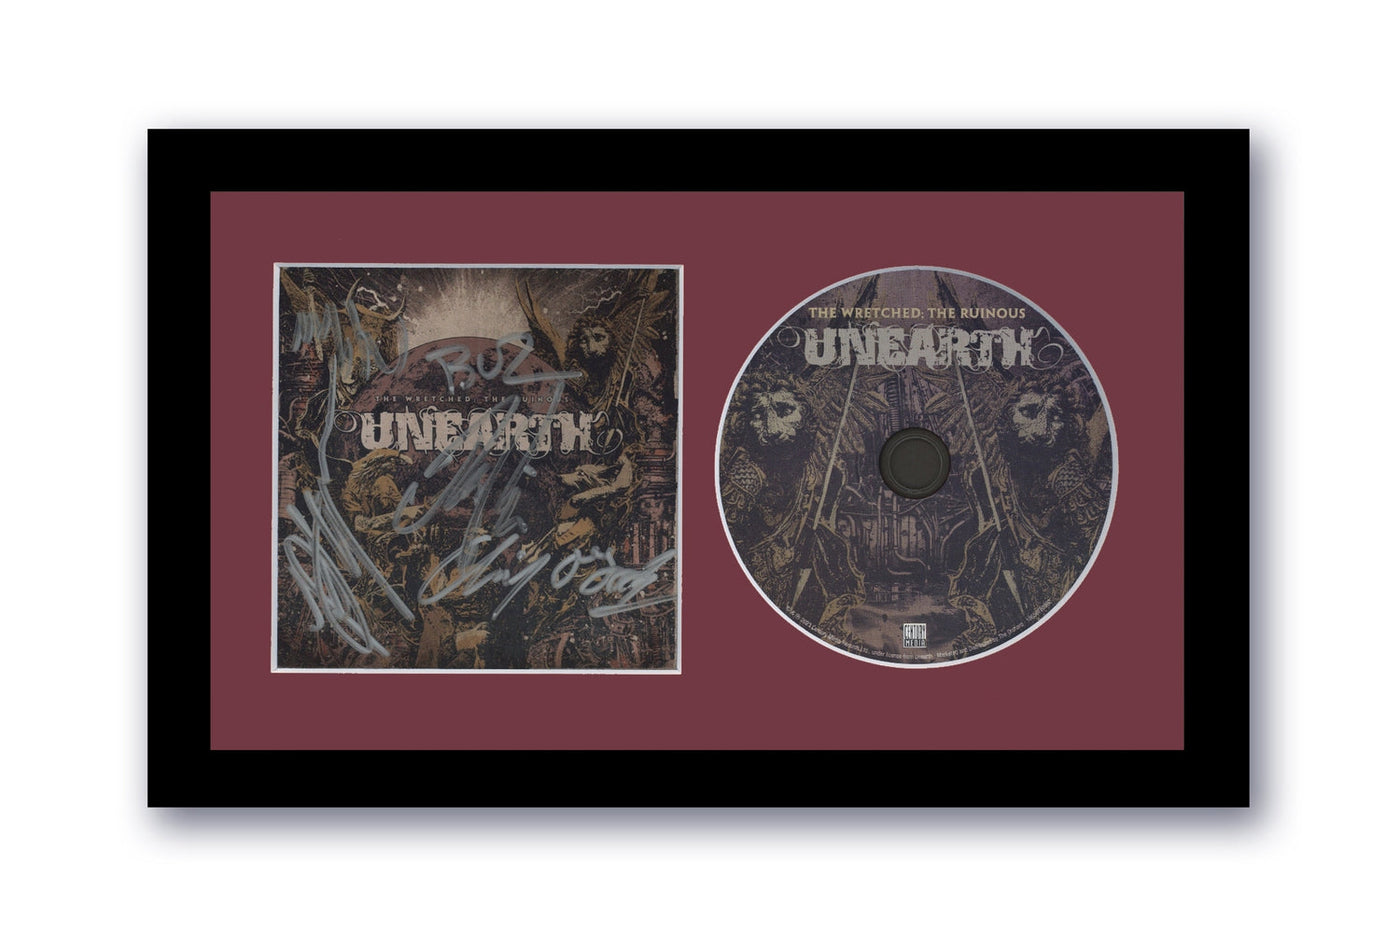 Unearth Signed 7x12 Custom Framed CD The Wretched The Ruinous Autographed ACOA 2